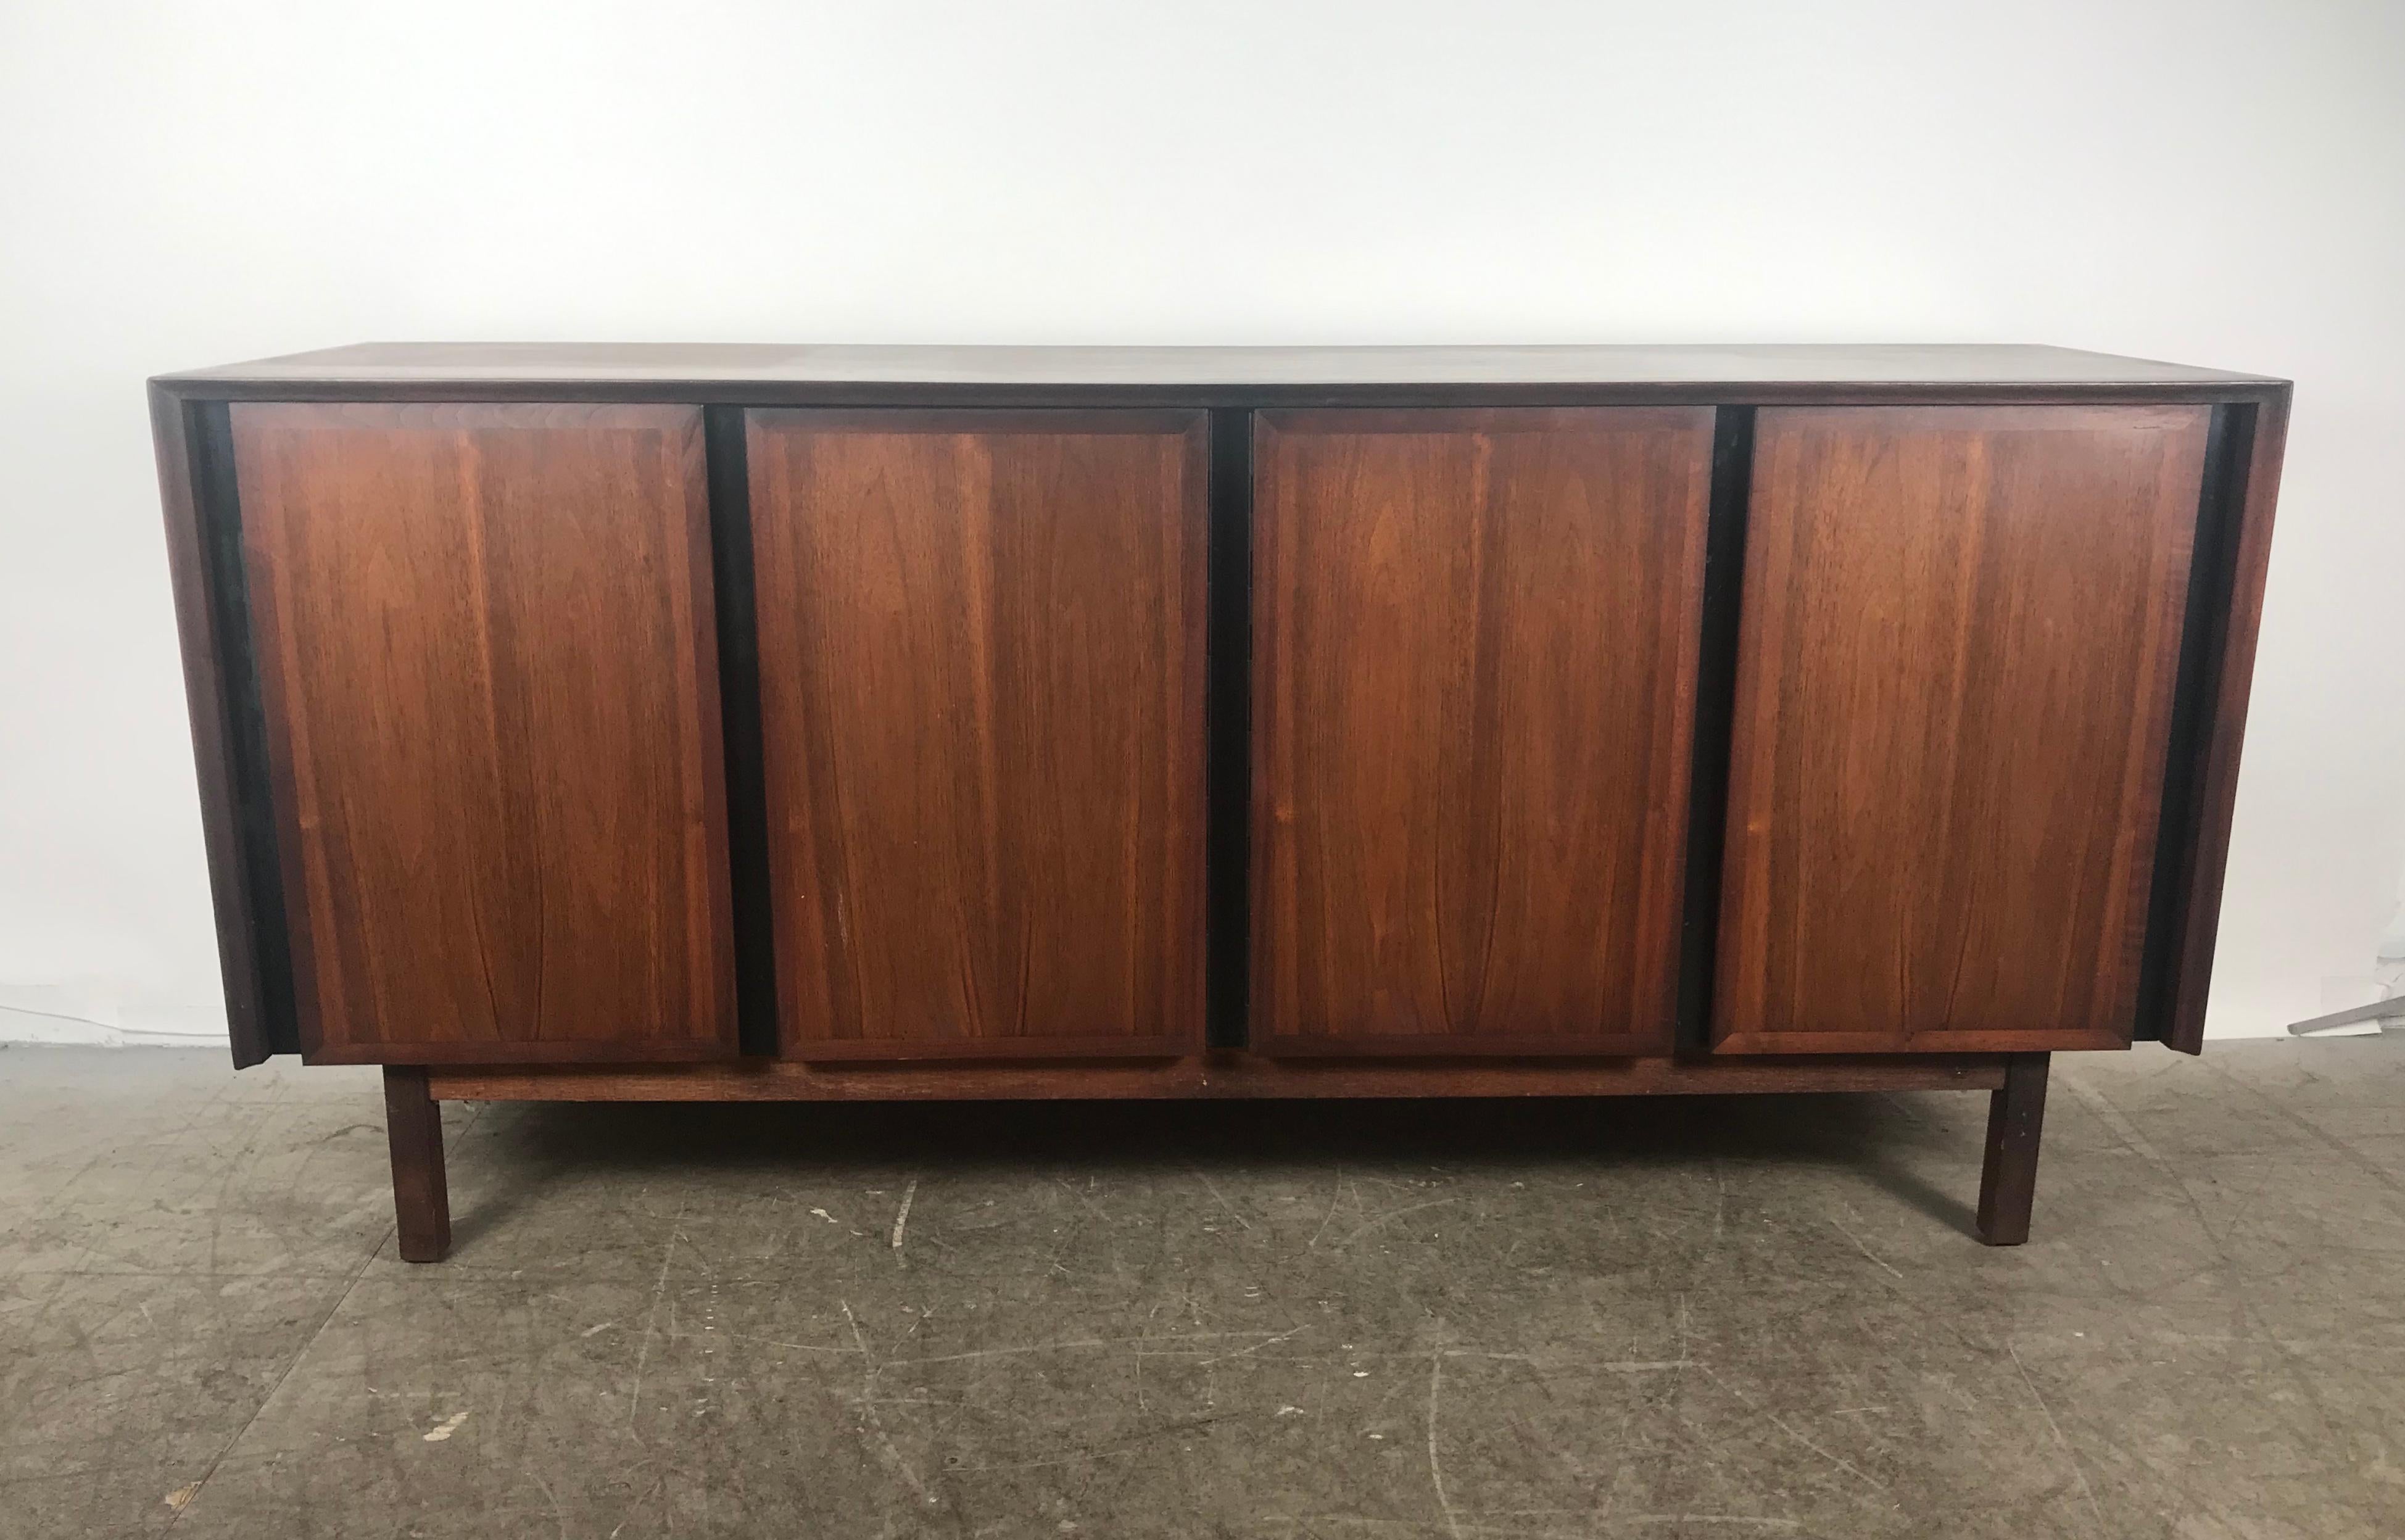 Stunning midcentury walnut credenza sideboard with top by Merton Gershun for Dillingham, circa 1970s.
Left doors open to three enclosed drawers. Right side doors reveal open shelves. Top features sliding glass doors, left cabinet with reversable